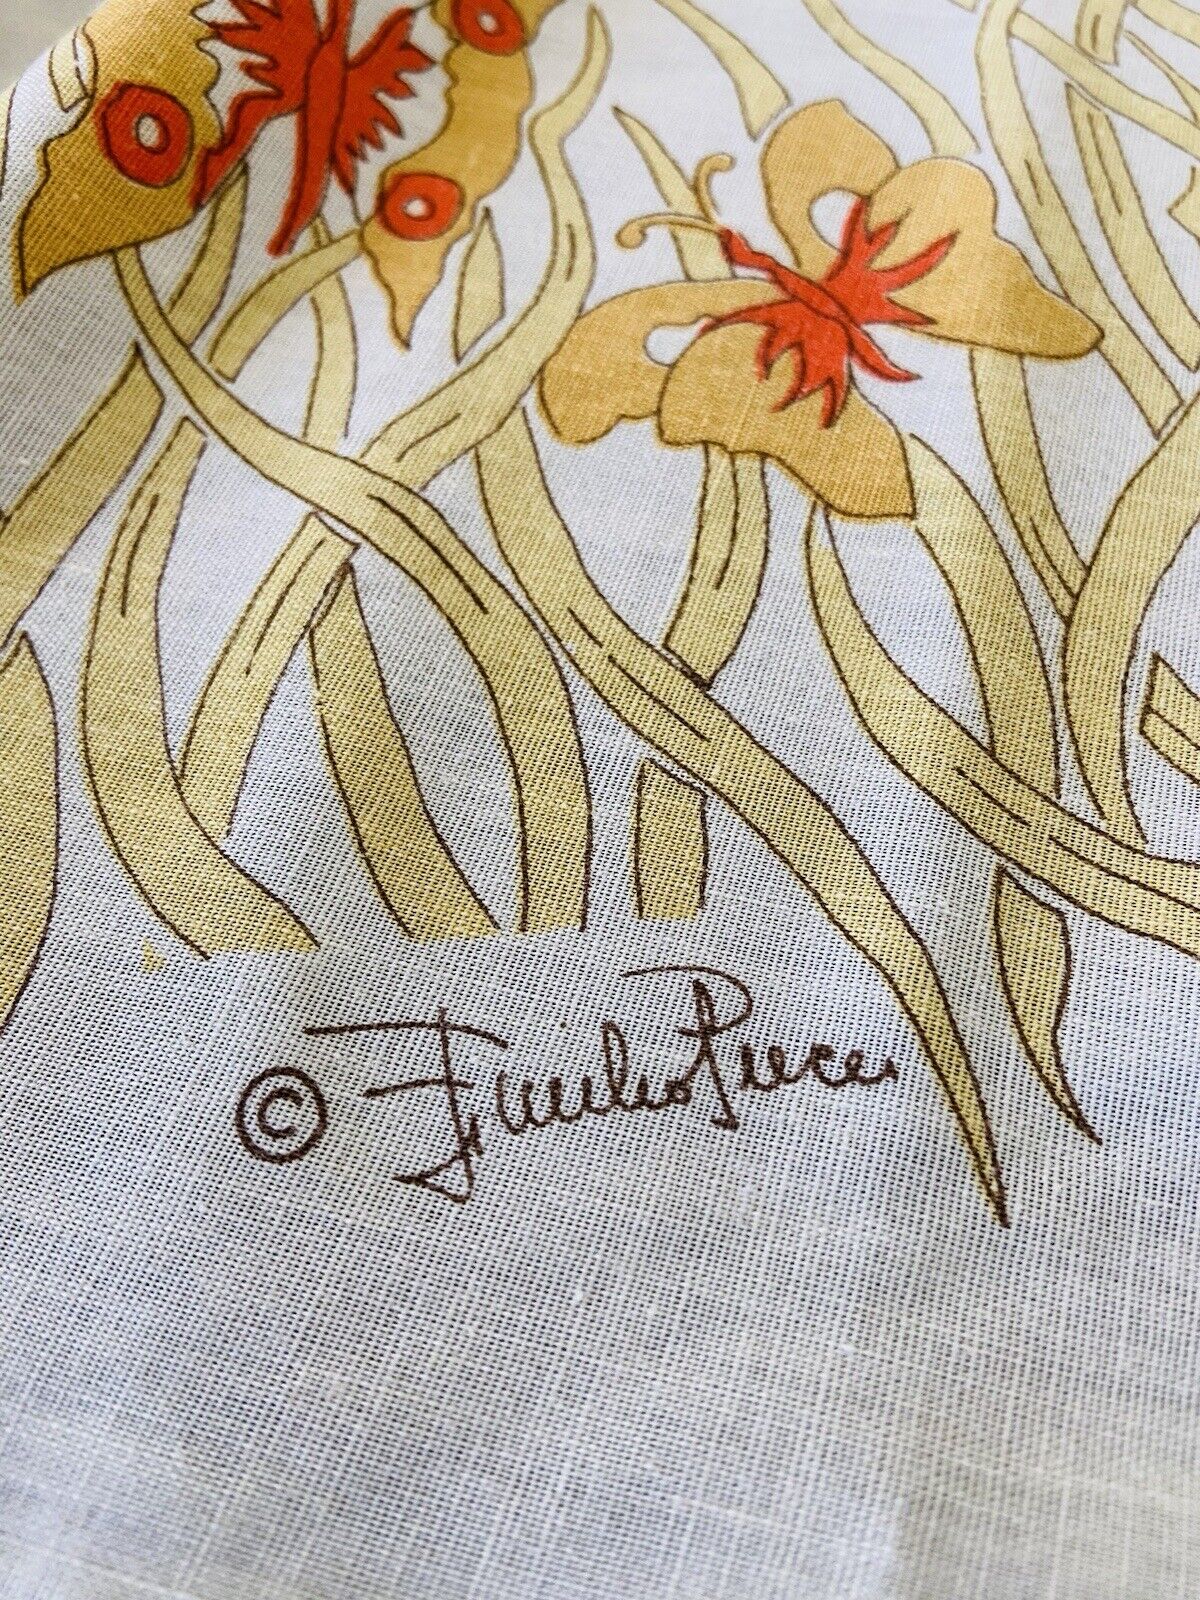 Vintage Emilio Pucci Butterfly Tablecloth & Napkins